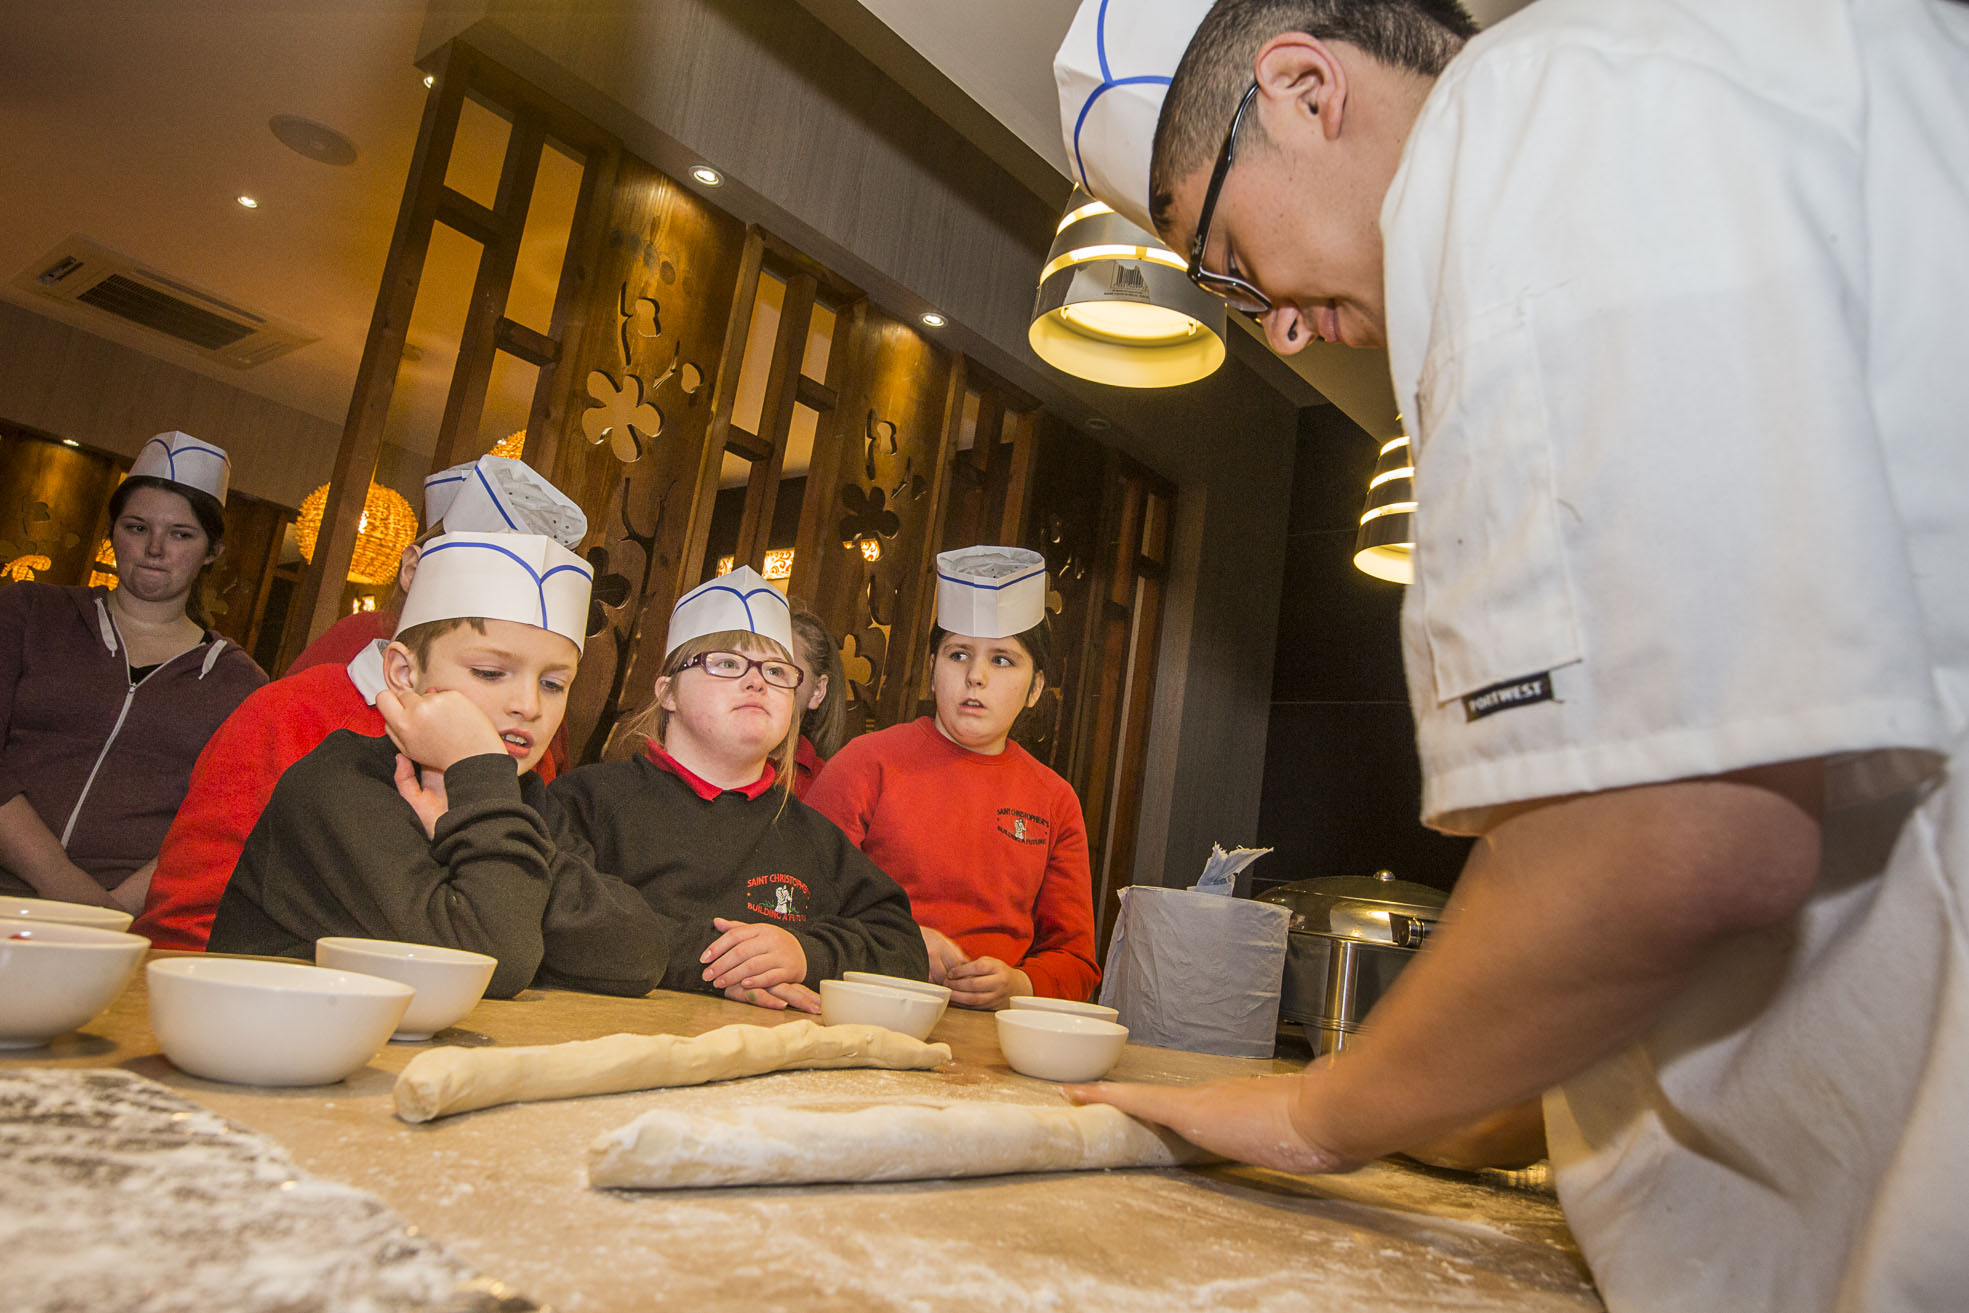 Top Chinese restaurant cooks up lesson for school children